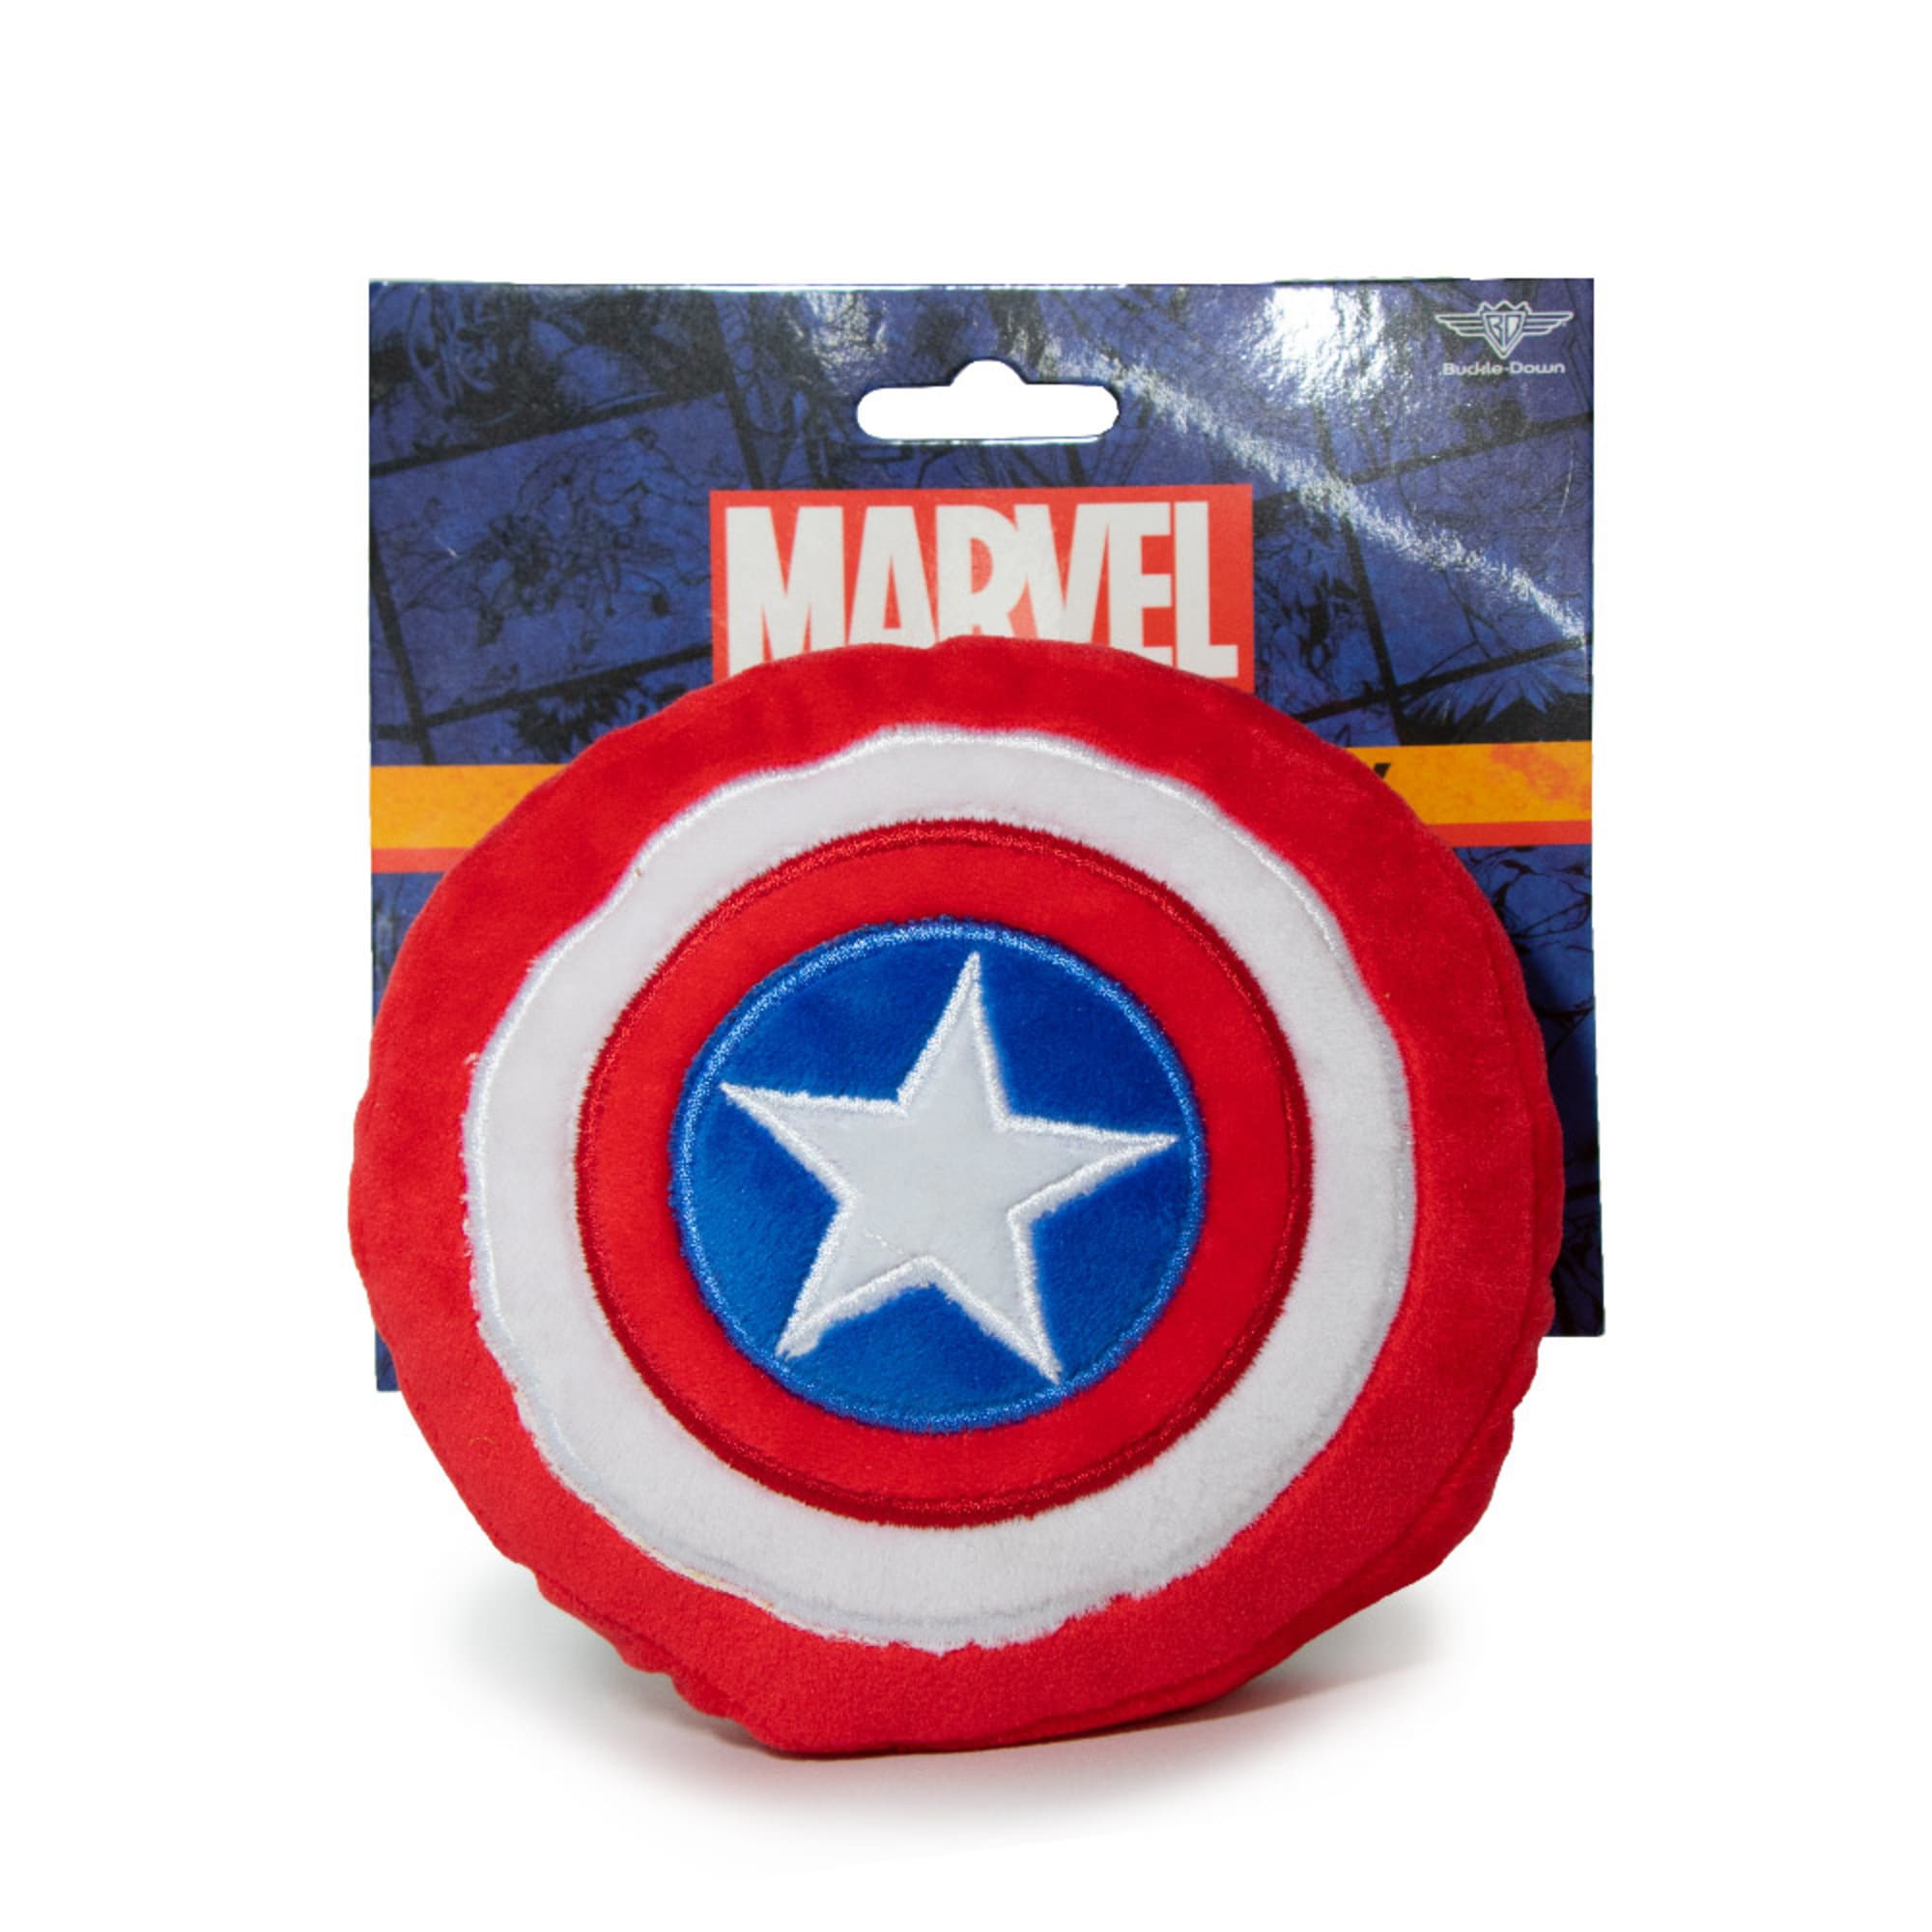 MARVEL SQUISH A BOOS SMALL - CAPTAIN AMERICA - COUSSIN 20CM - TY